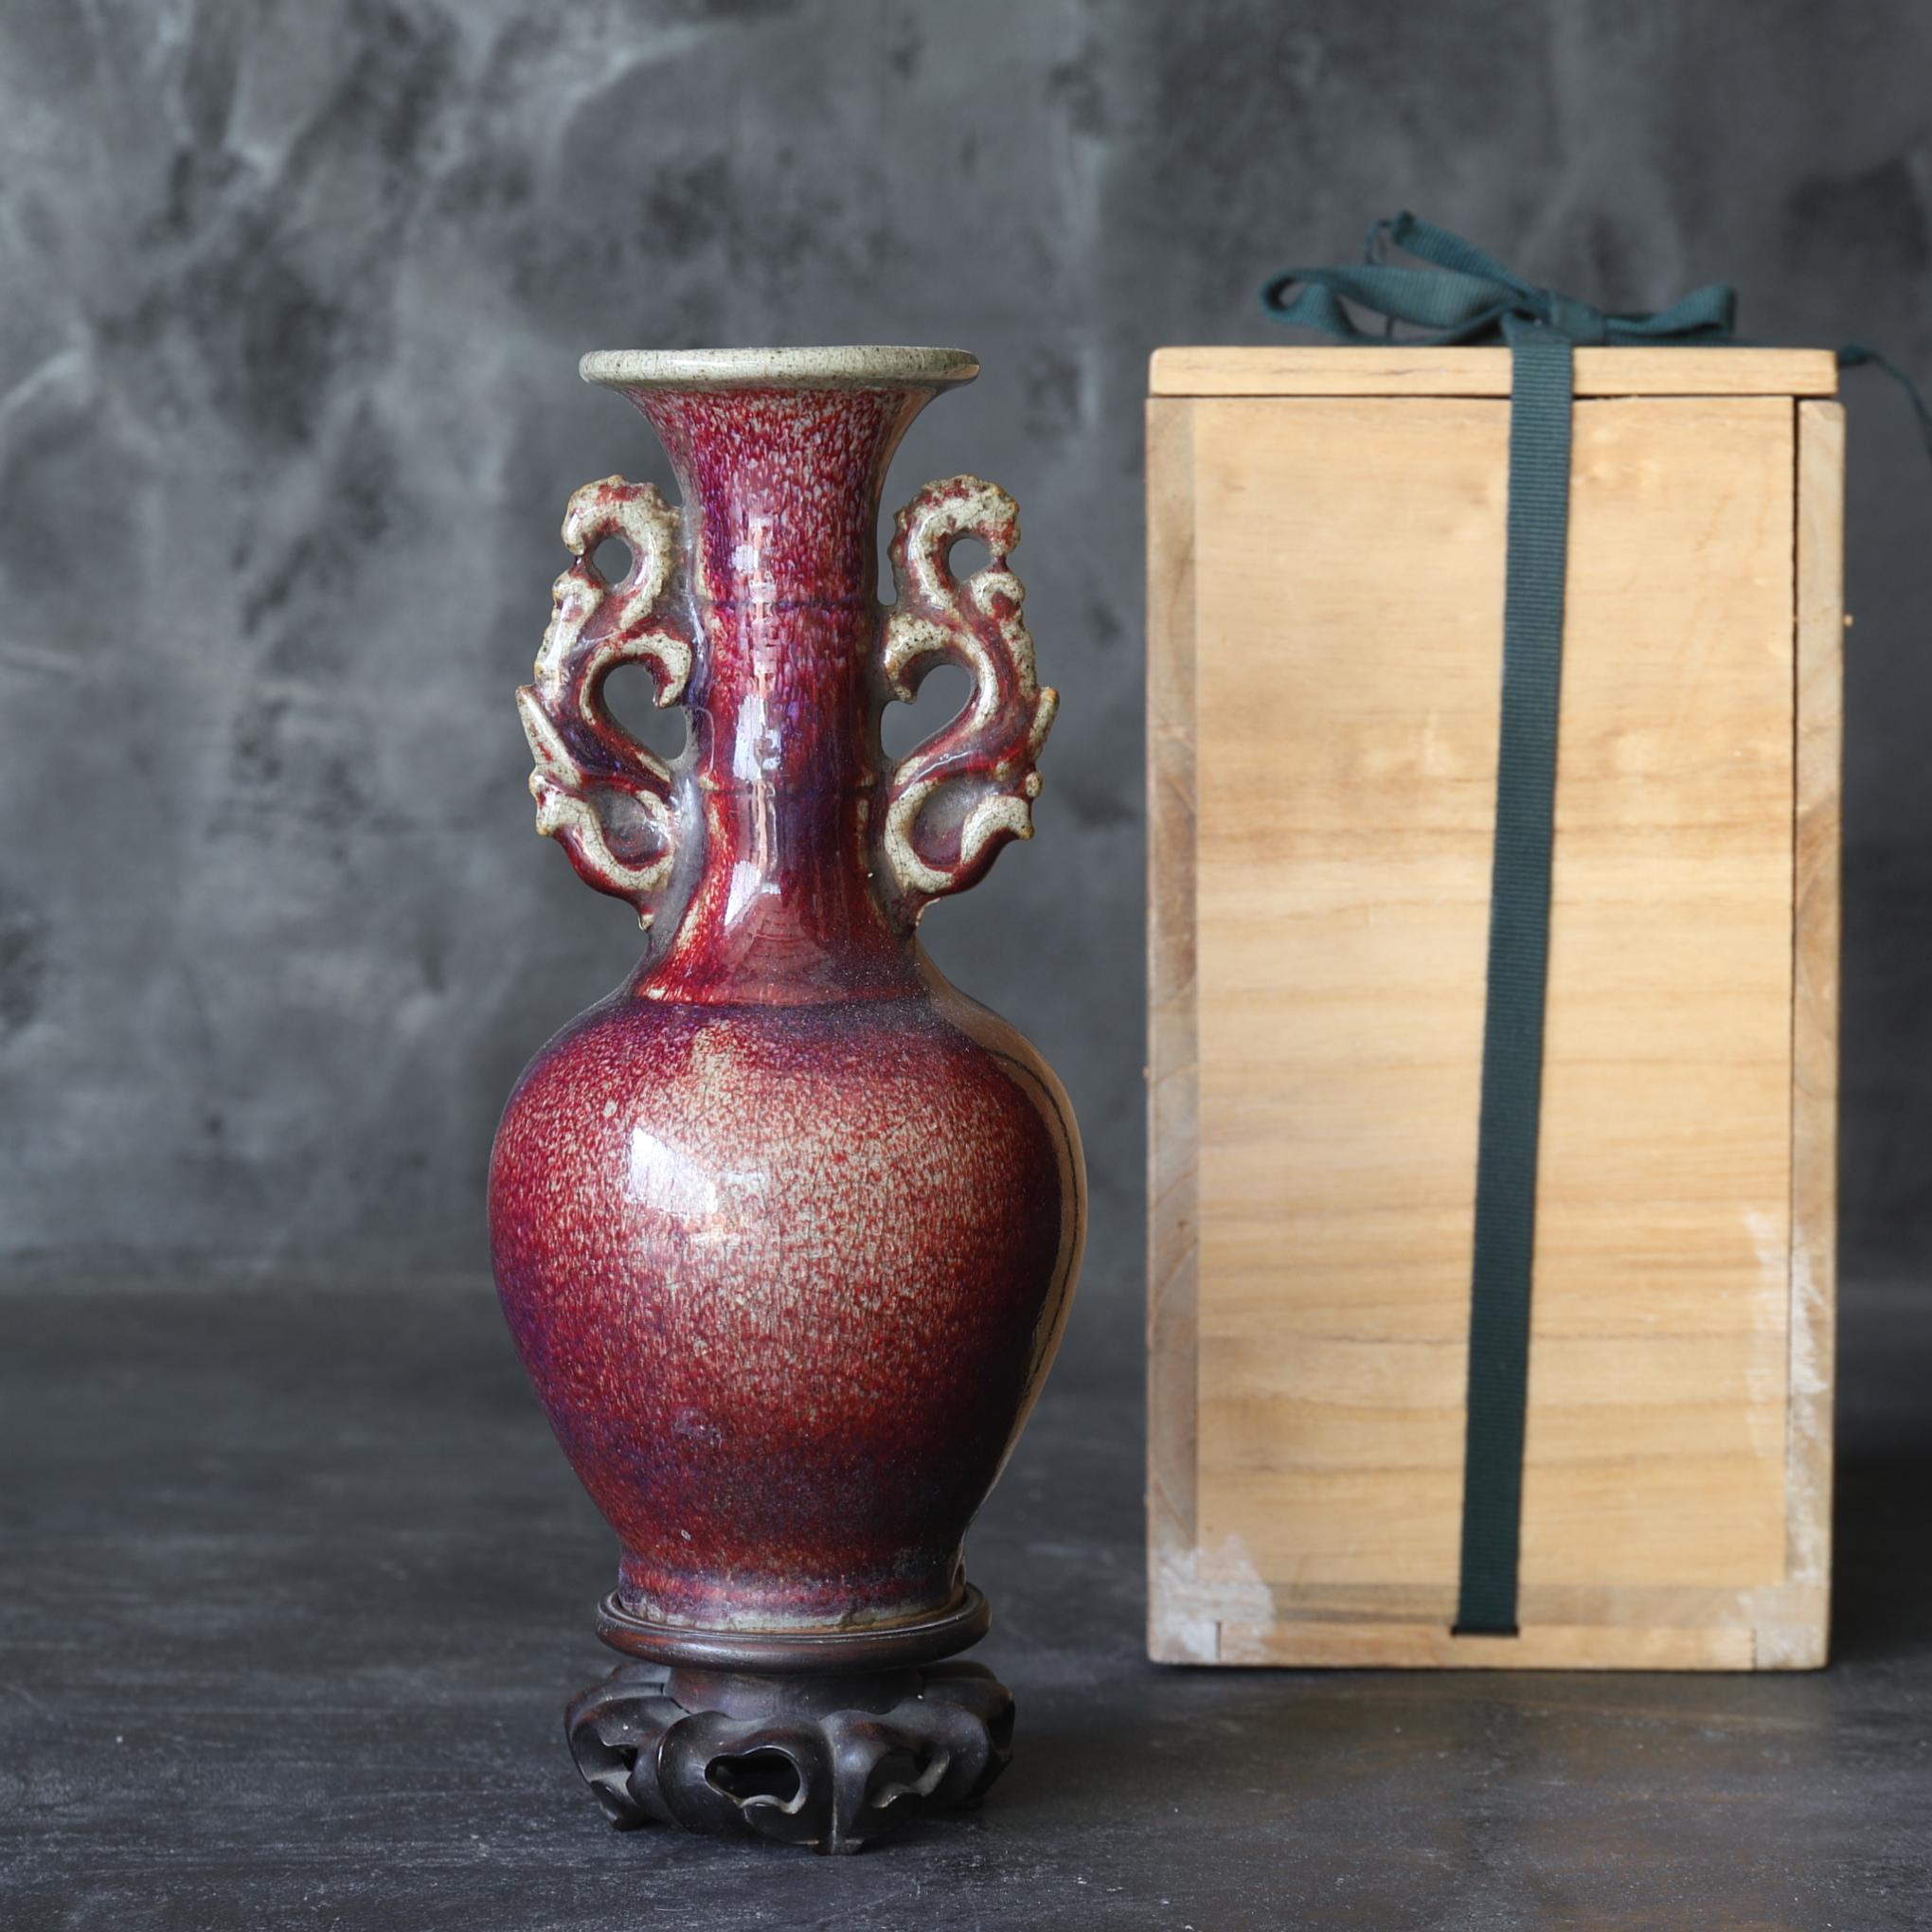 Jun ware's red glaze is made with copper red glaze and applied to the surface of porcelain before firing. Due to the high temperature at which the glaze is fired, copper oxide precipitates on the surface of the glaze, creating a beautiful red color.